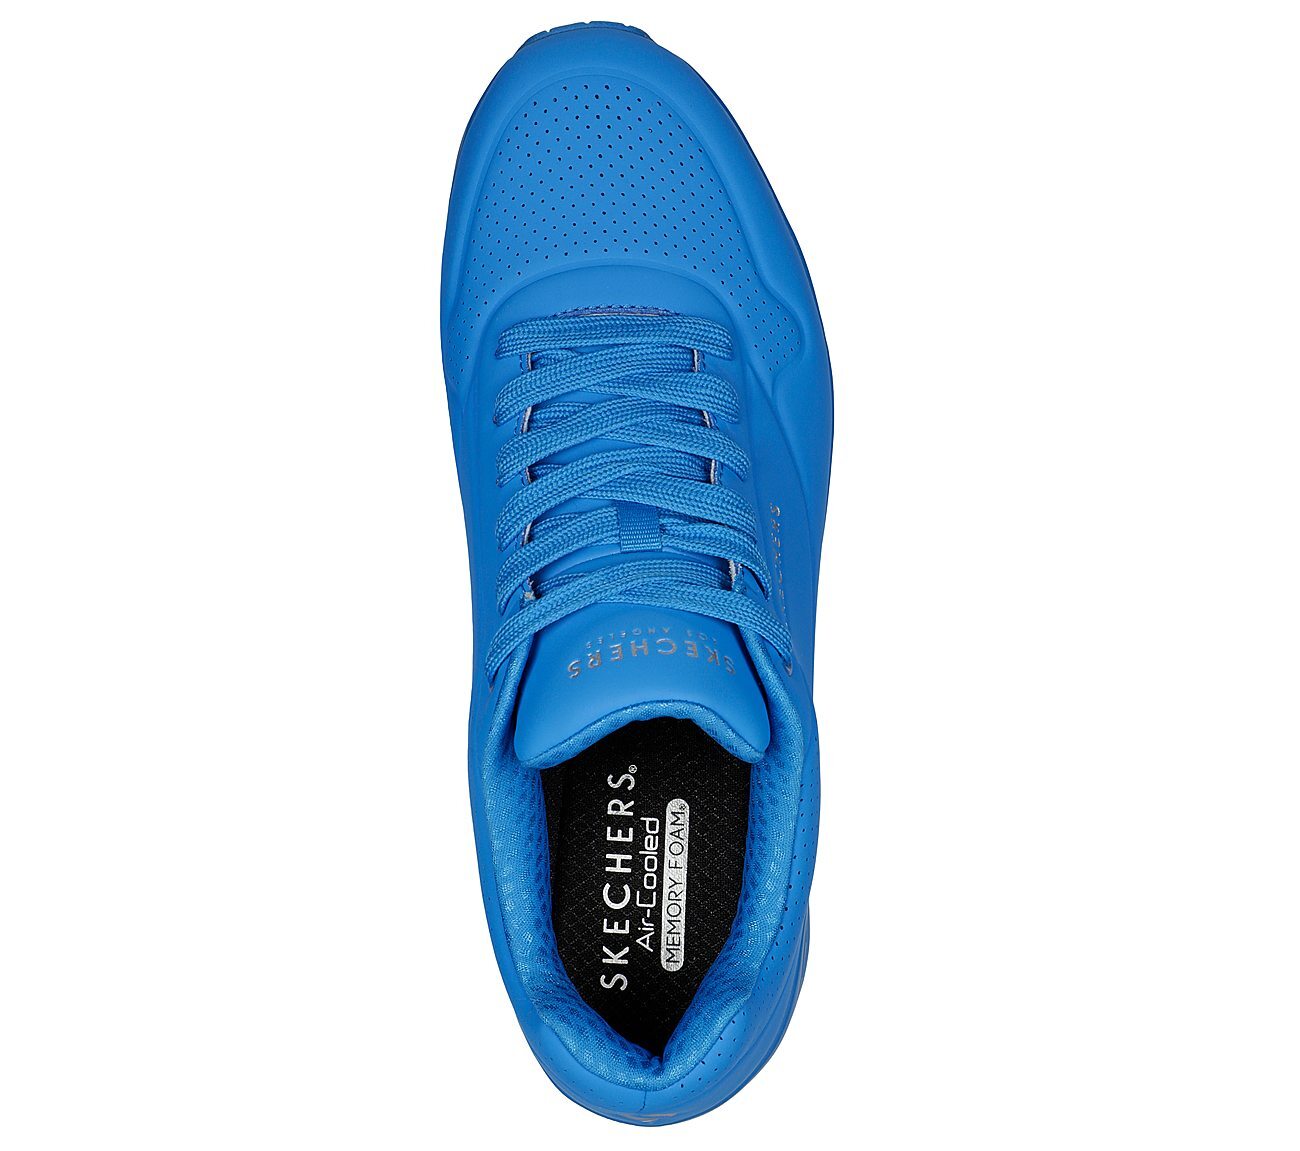 UNO - STAND ON AIR, BLUE Footwear Top View